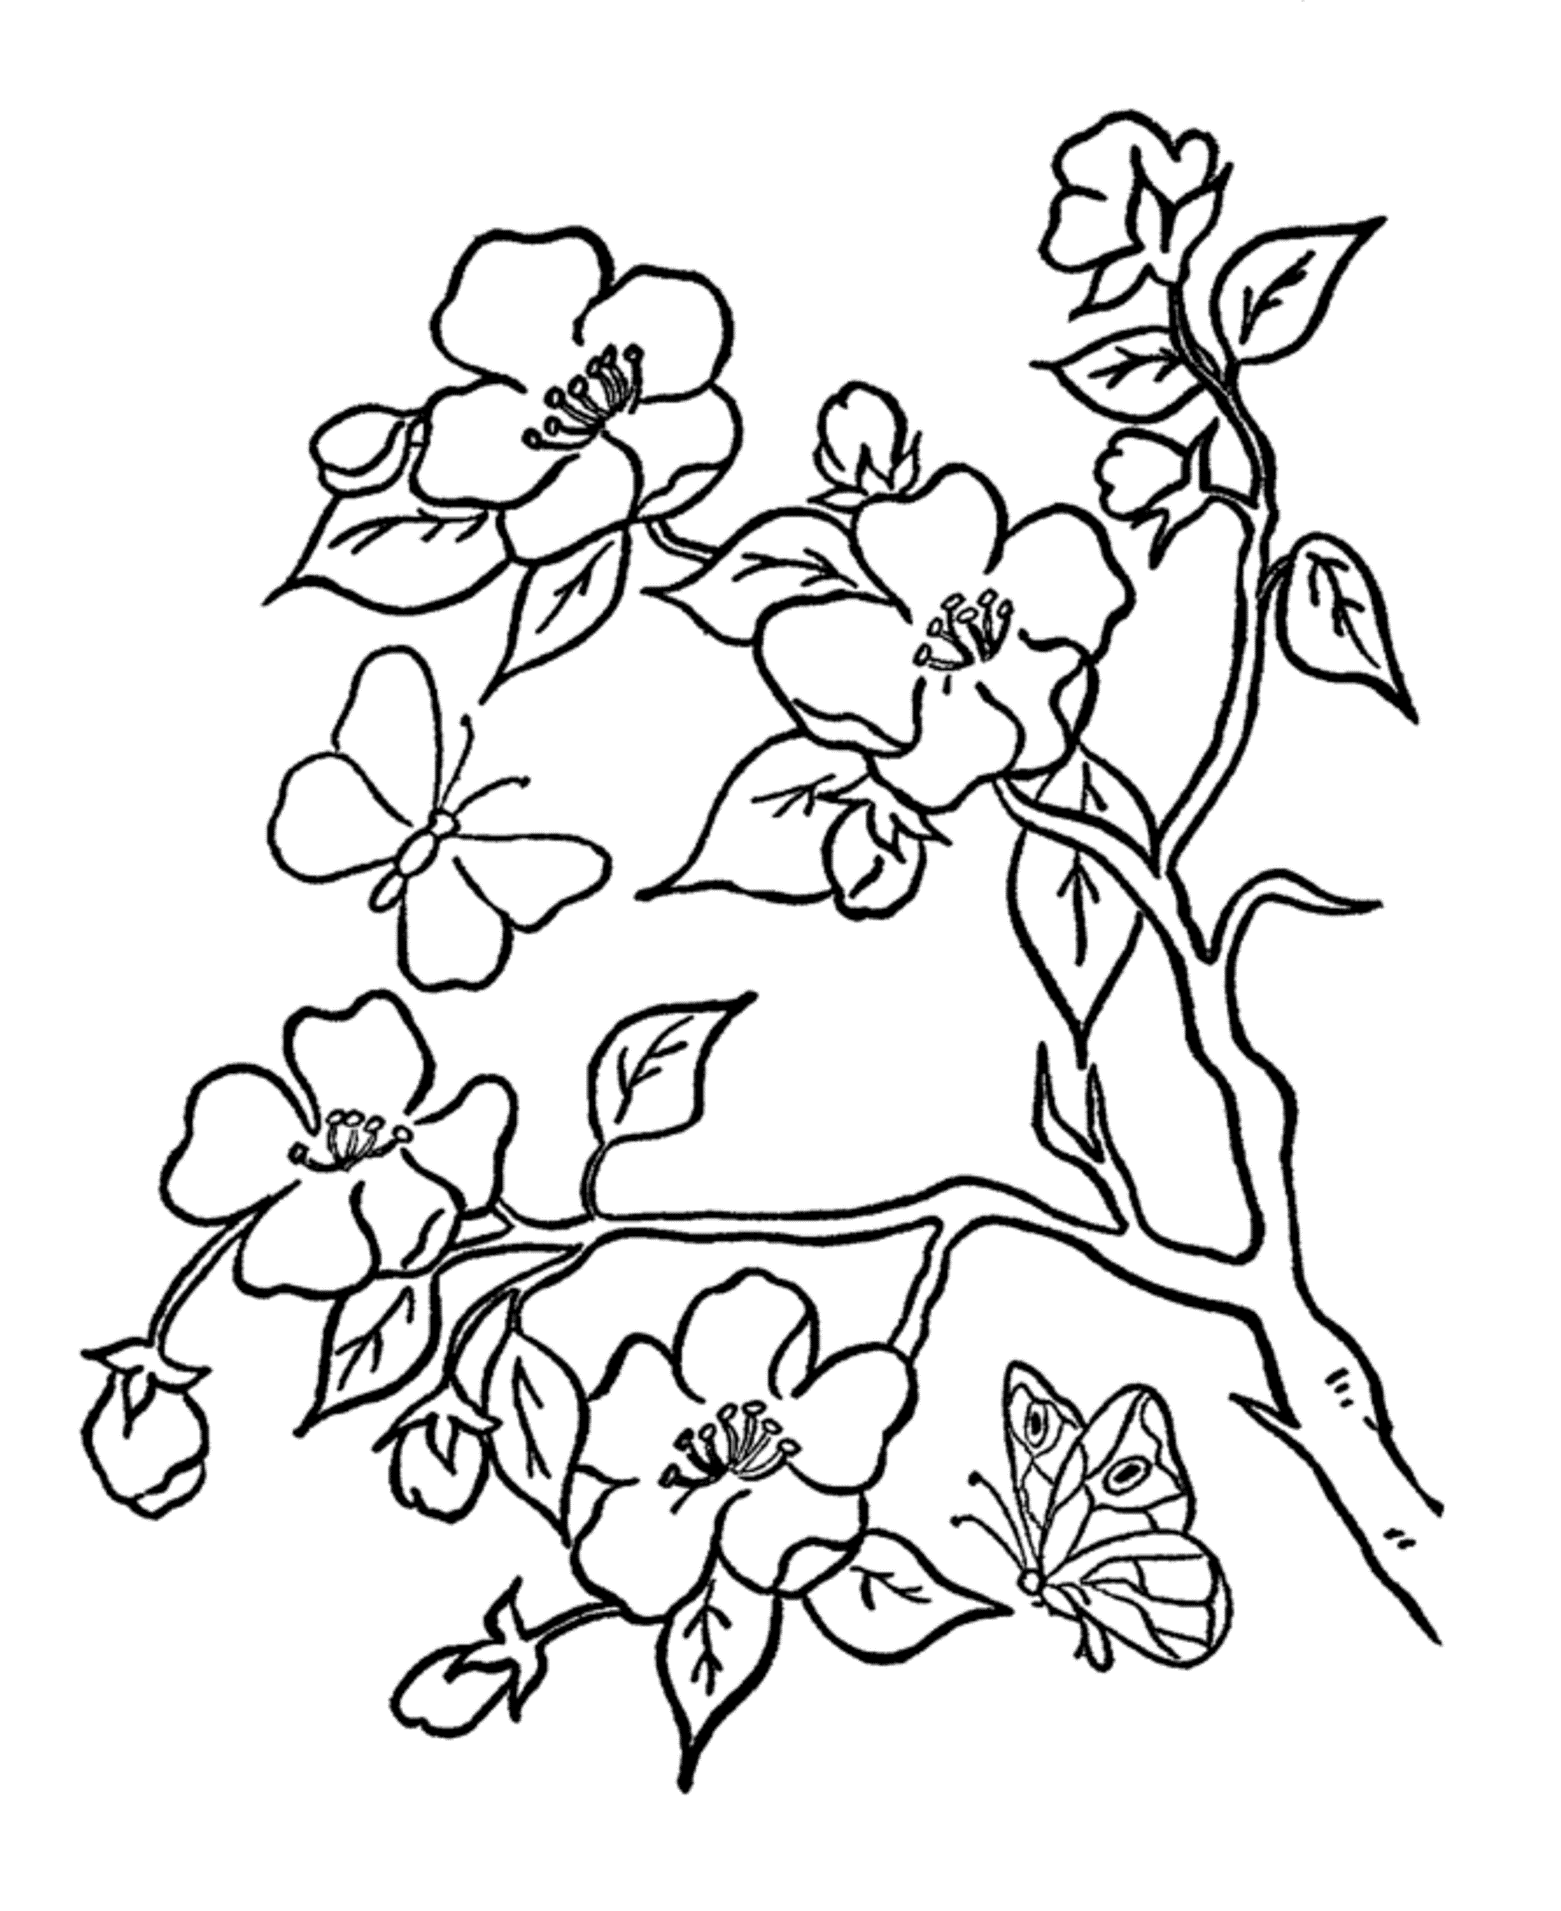 Download Butterfly On A Flower Coloring Page - Coloring Home